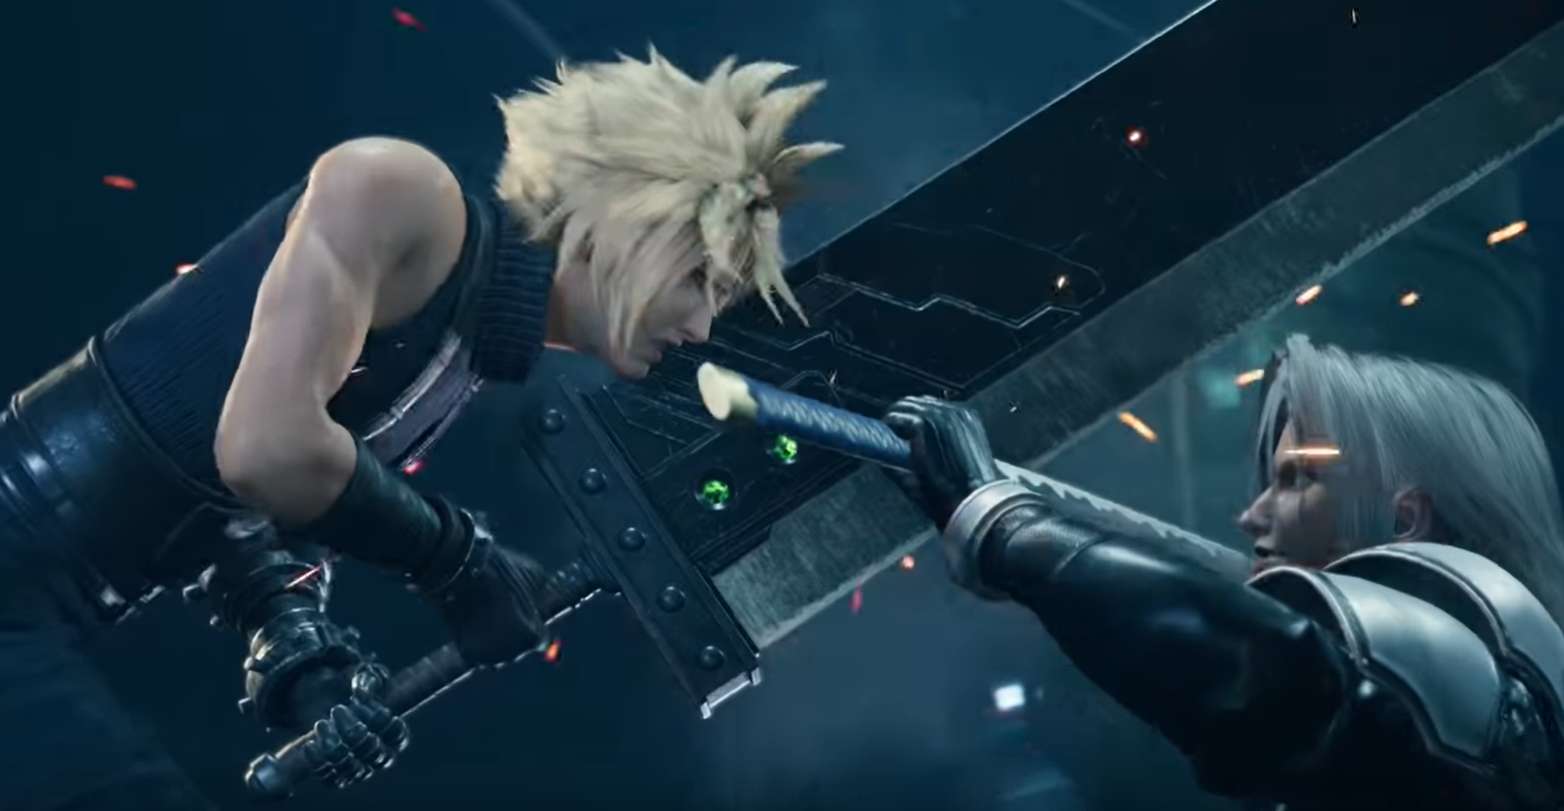 If You Ordered Final Fantasy 7 Remake Through Amazon, Recent Policy Change Might Delay Your Delivery